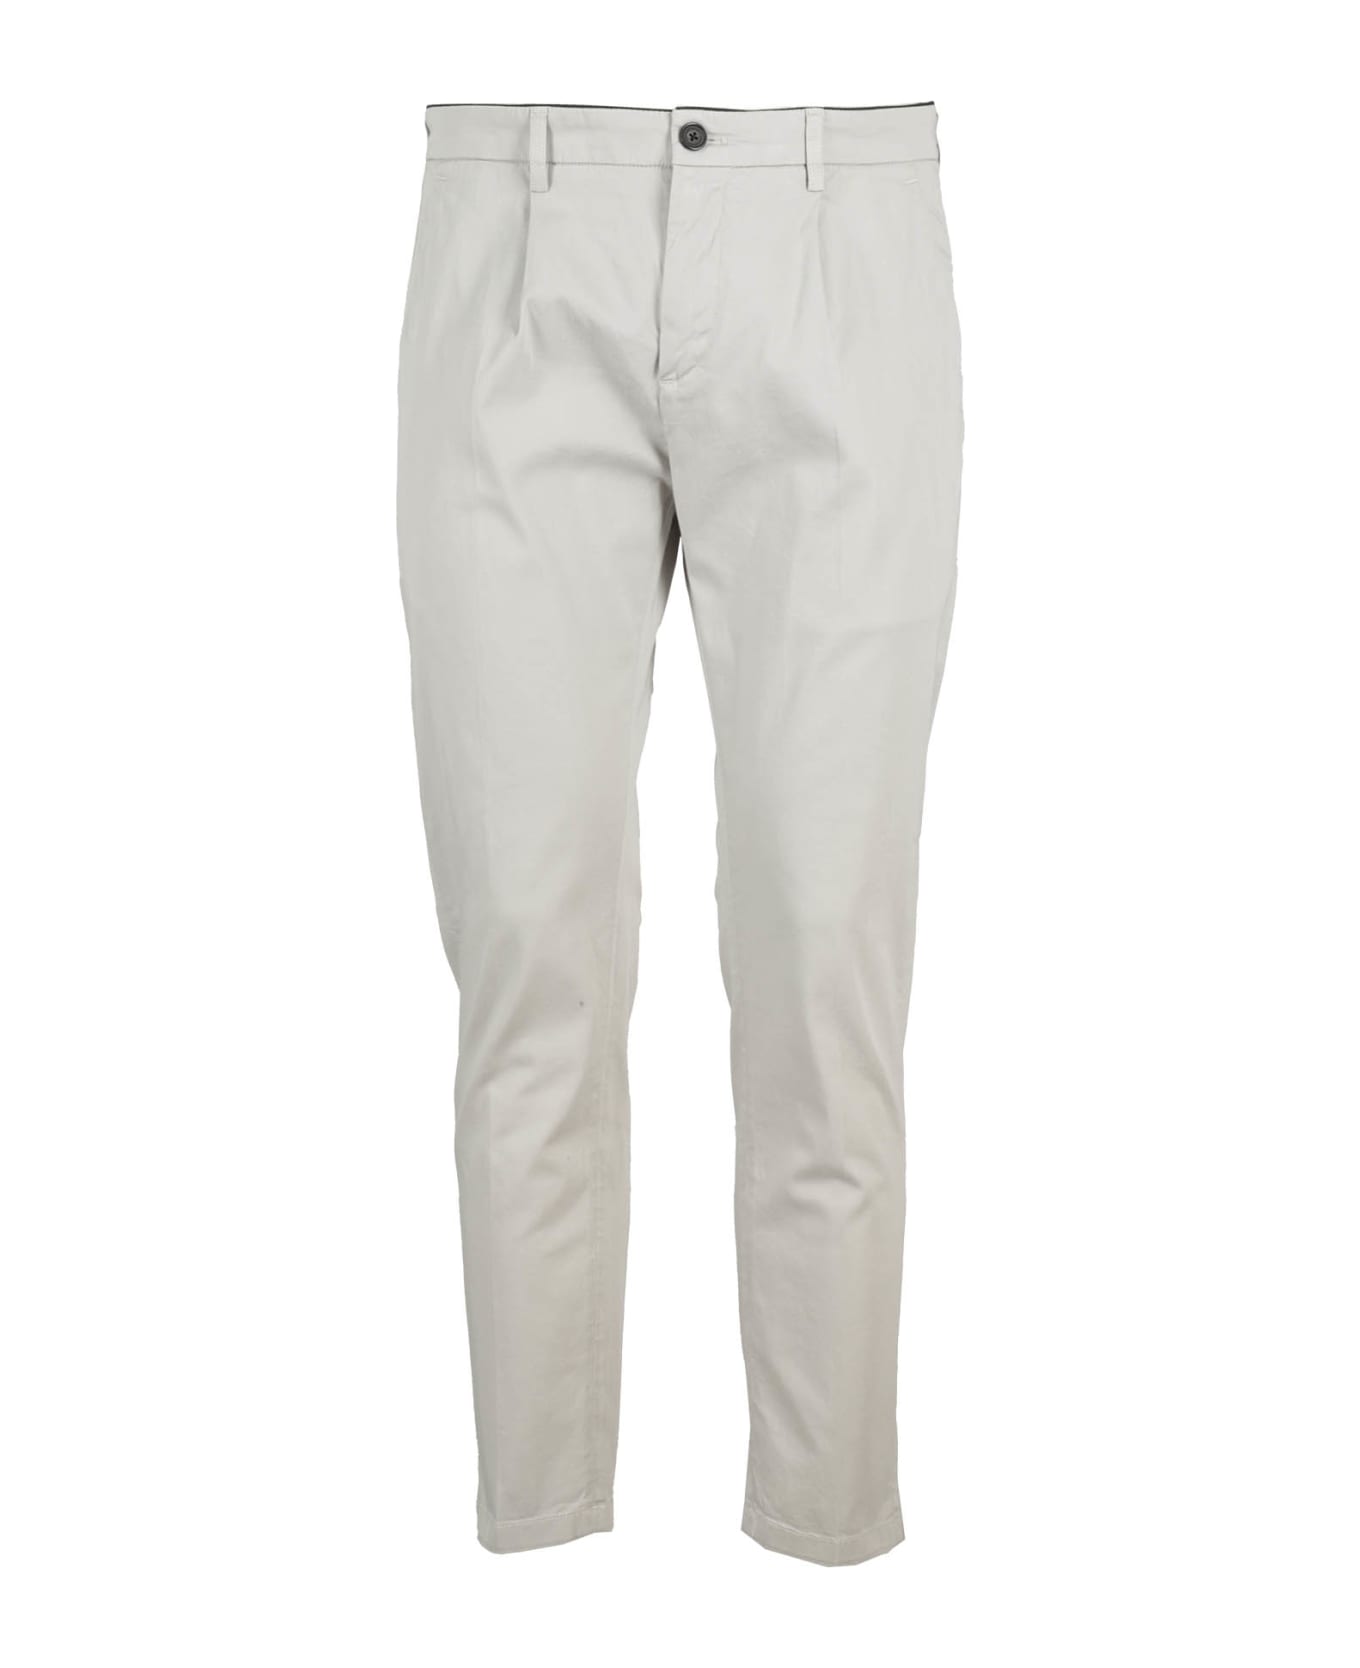 Department Five Prince Pences Chinos - Stucco